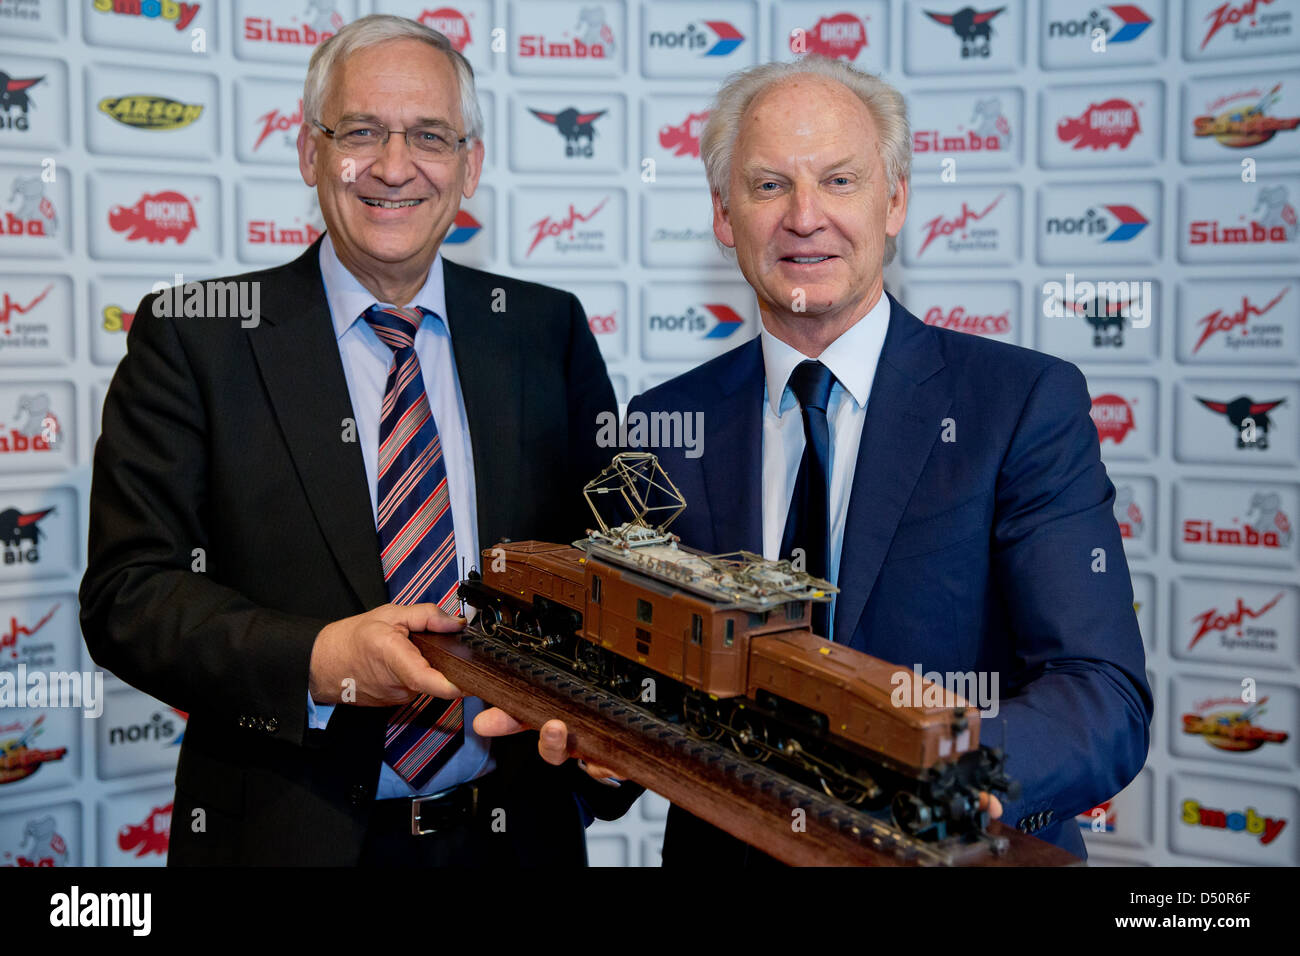 CEO of the Simba Dickie Group Michael Sieber (R) poses with Maerklin's  liquidator Michael Pluta as part of the press conference about the take  over of the model train company Maerklin at